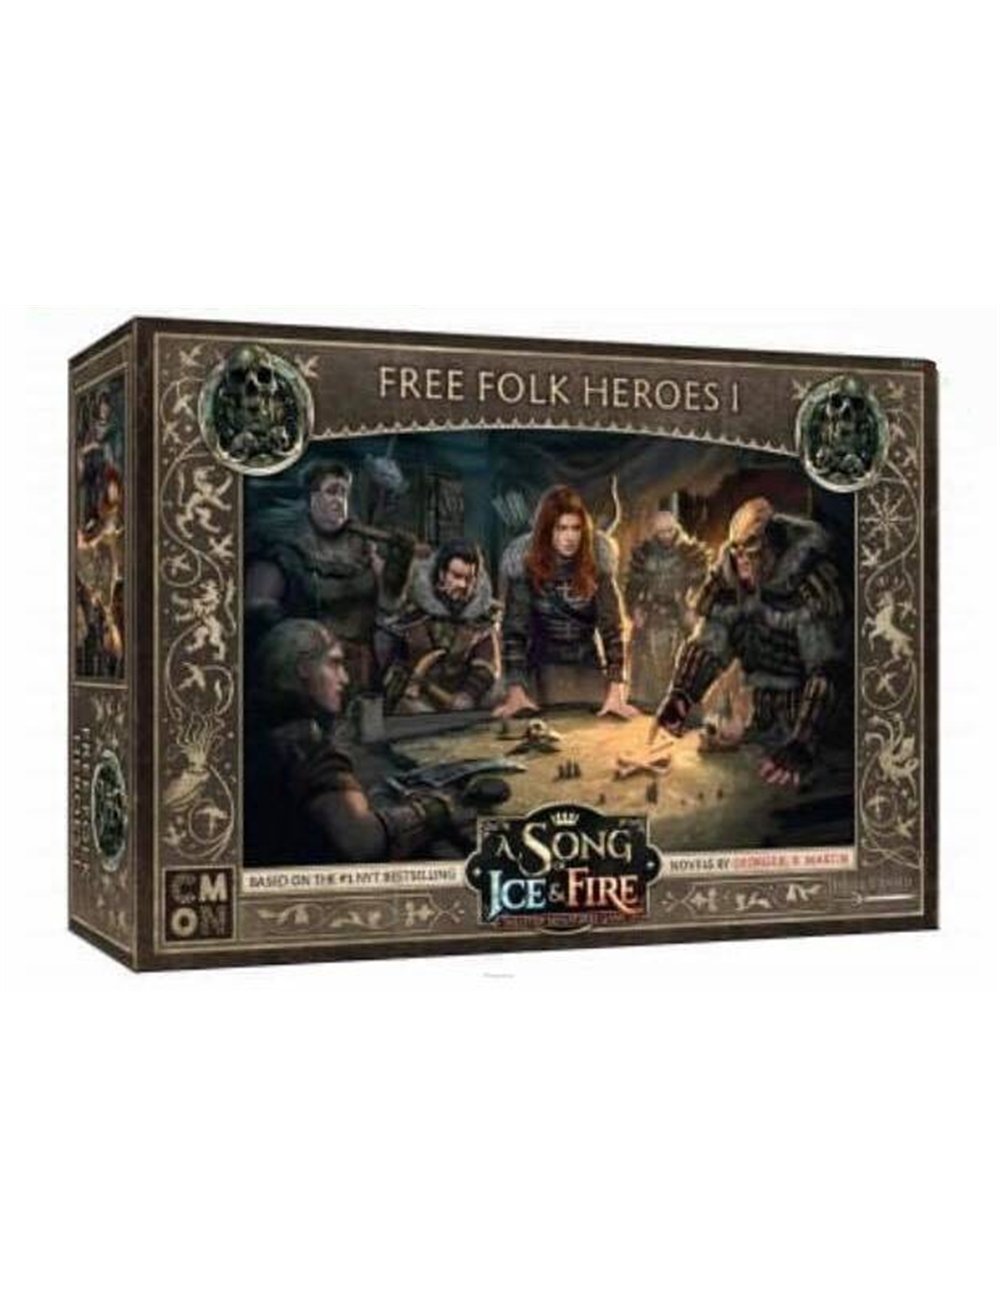 A SONG OF ICE & FIRE - Free Folk Heroes 1 PL